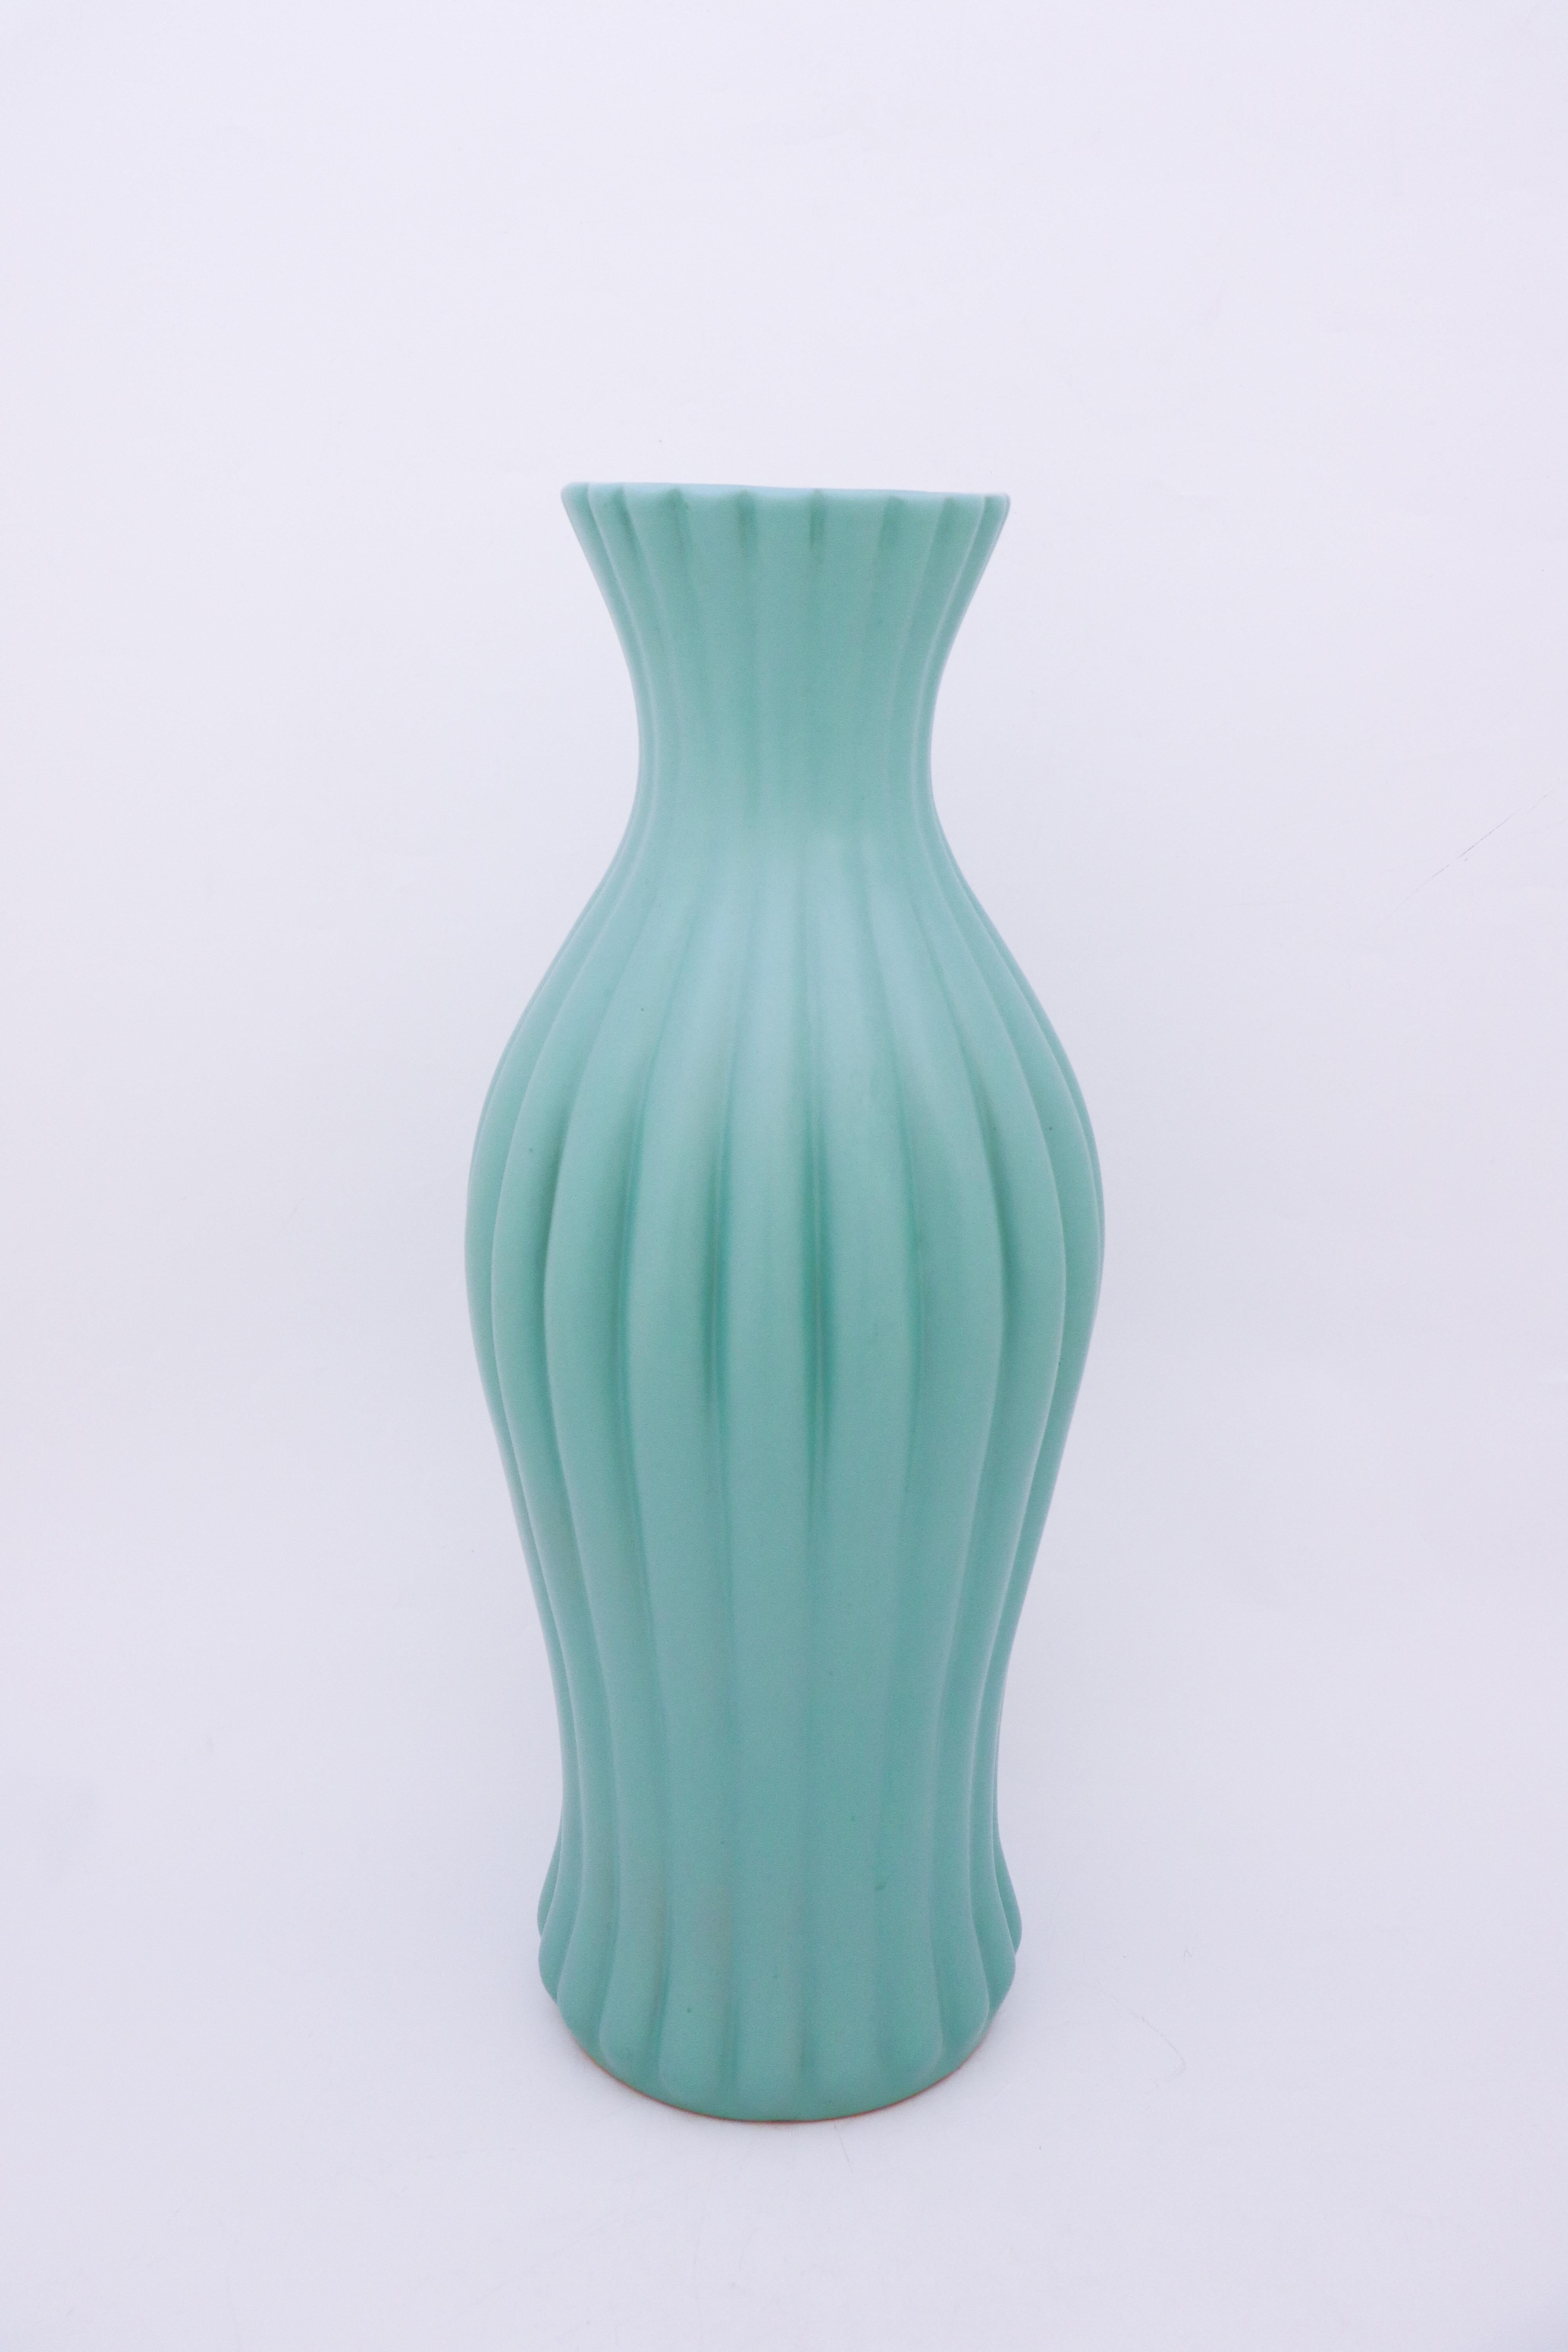 A large turquoise floor vase designed by Ewald Dahlskog at Bo Fajans in Gefle in the 1930s. The vase is 52 cm high.